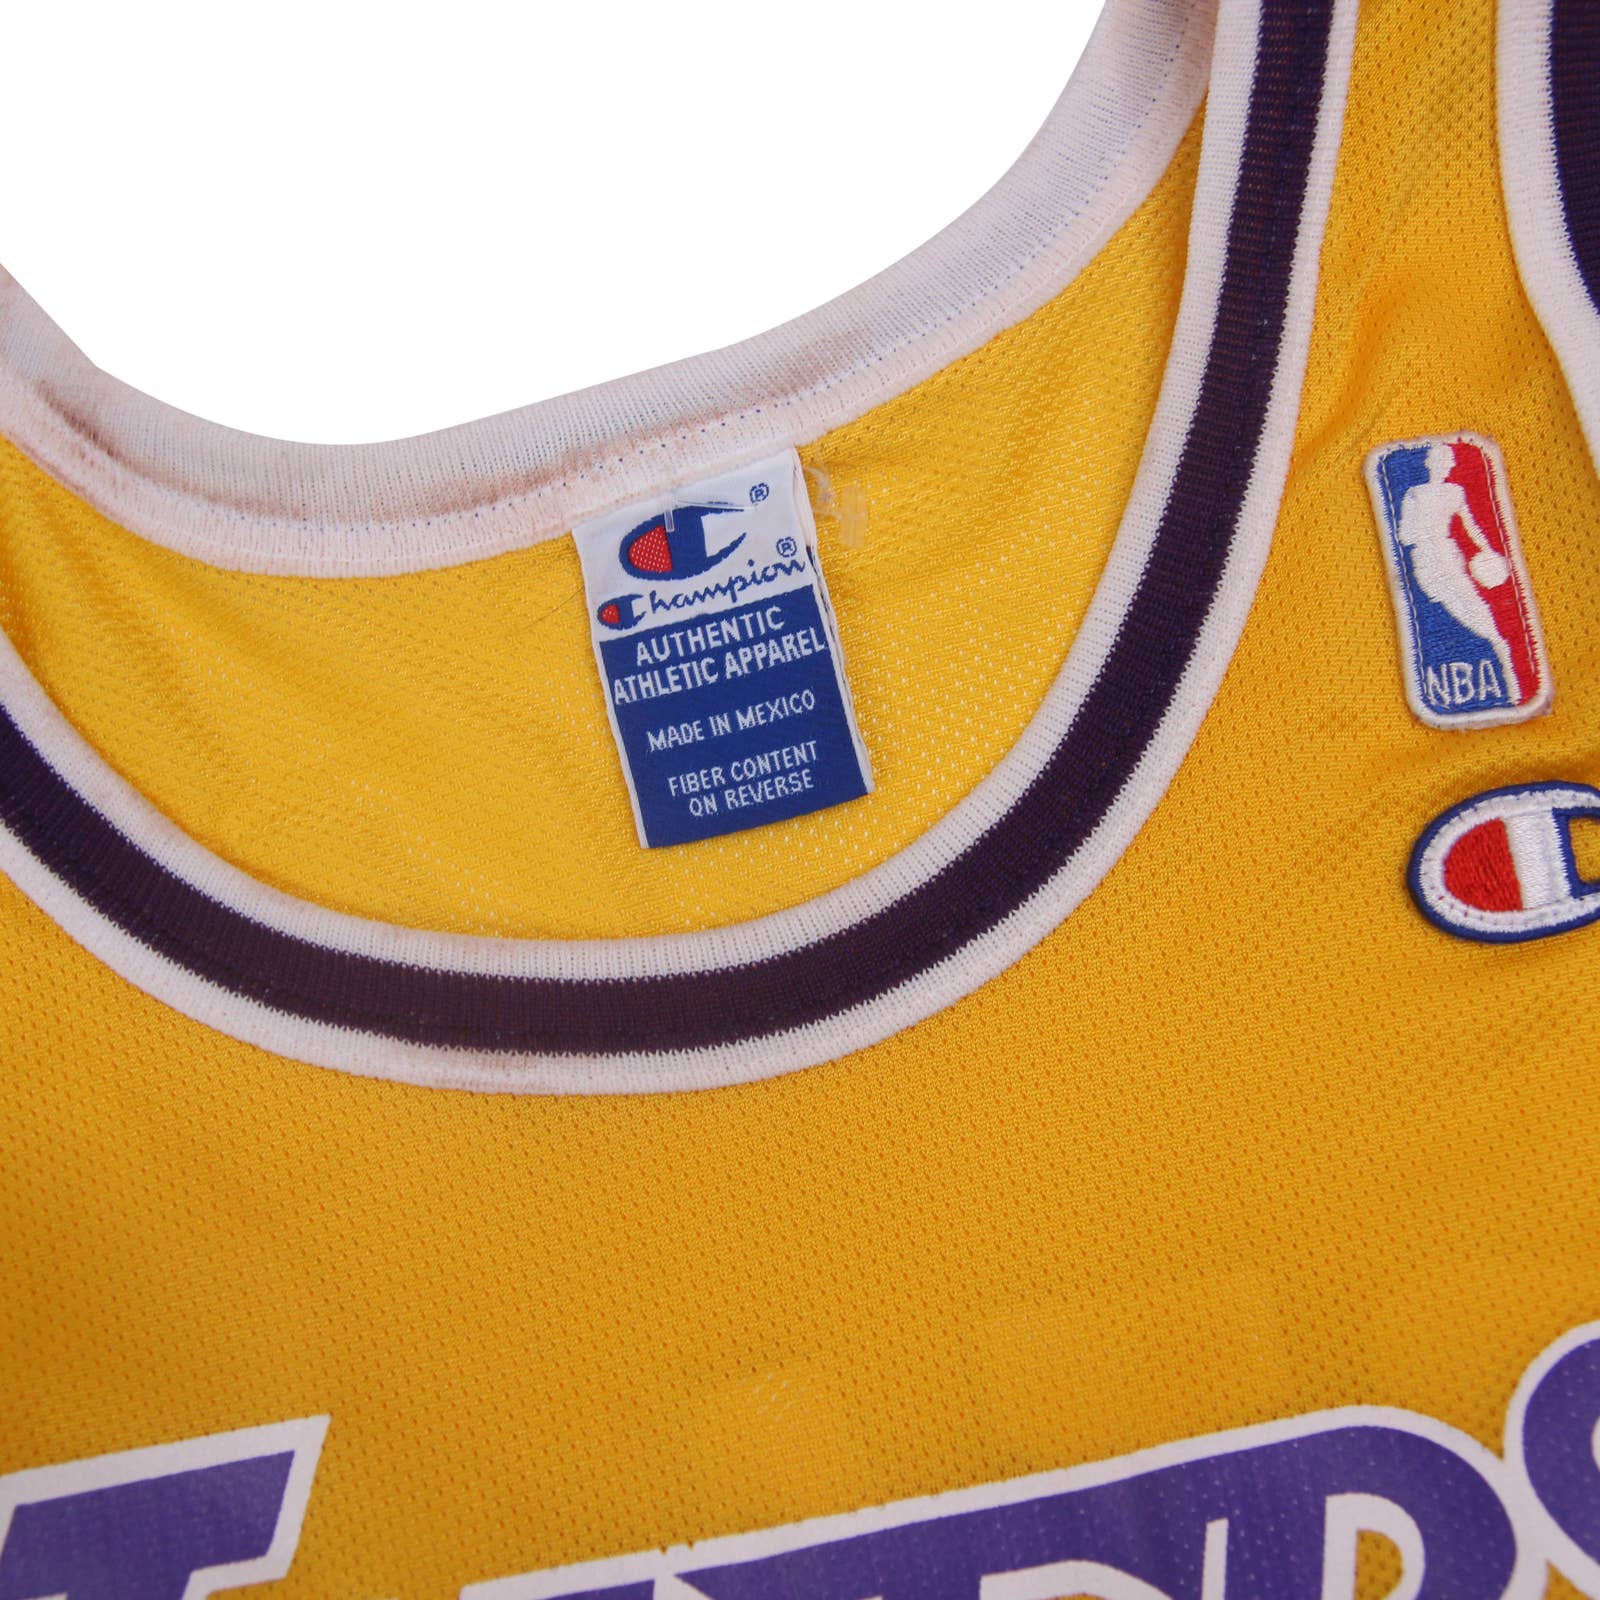 8 lakers jersey